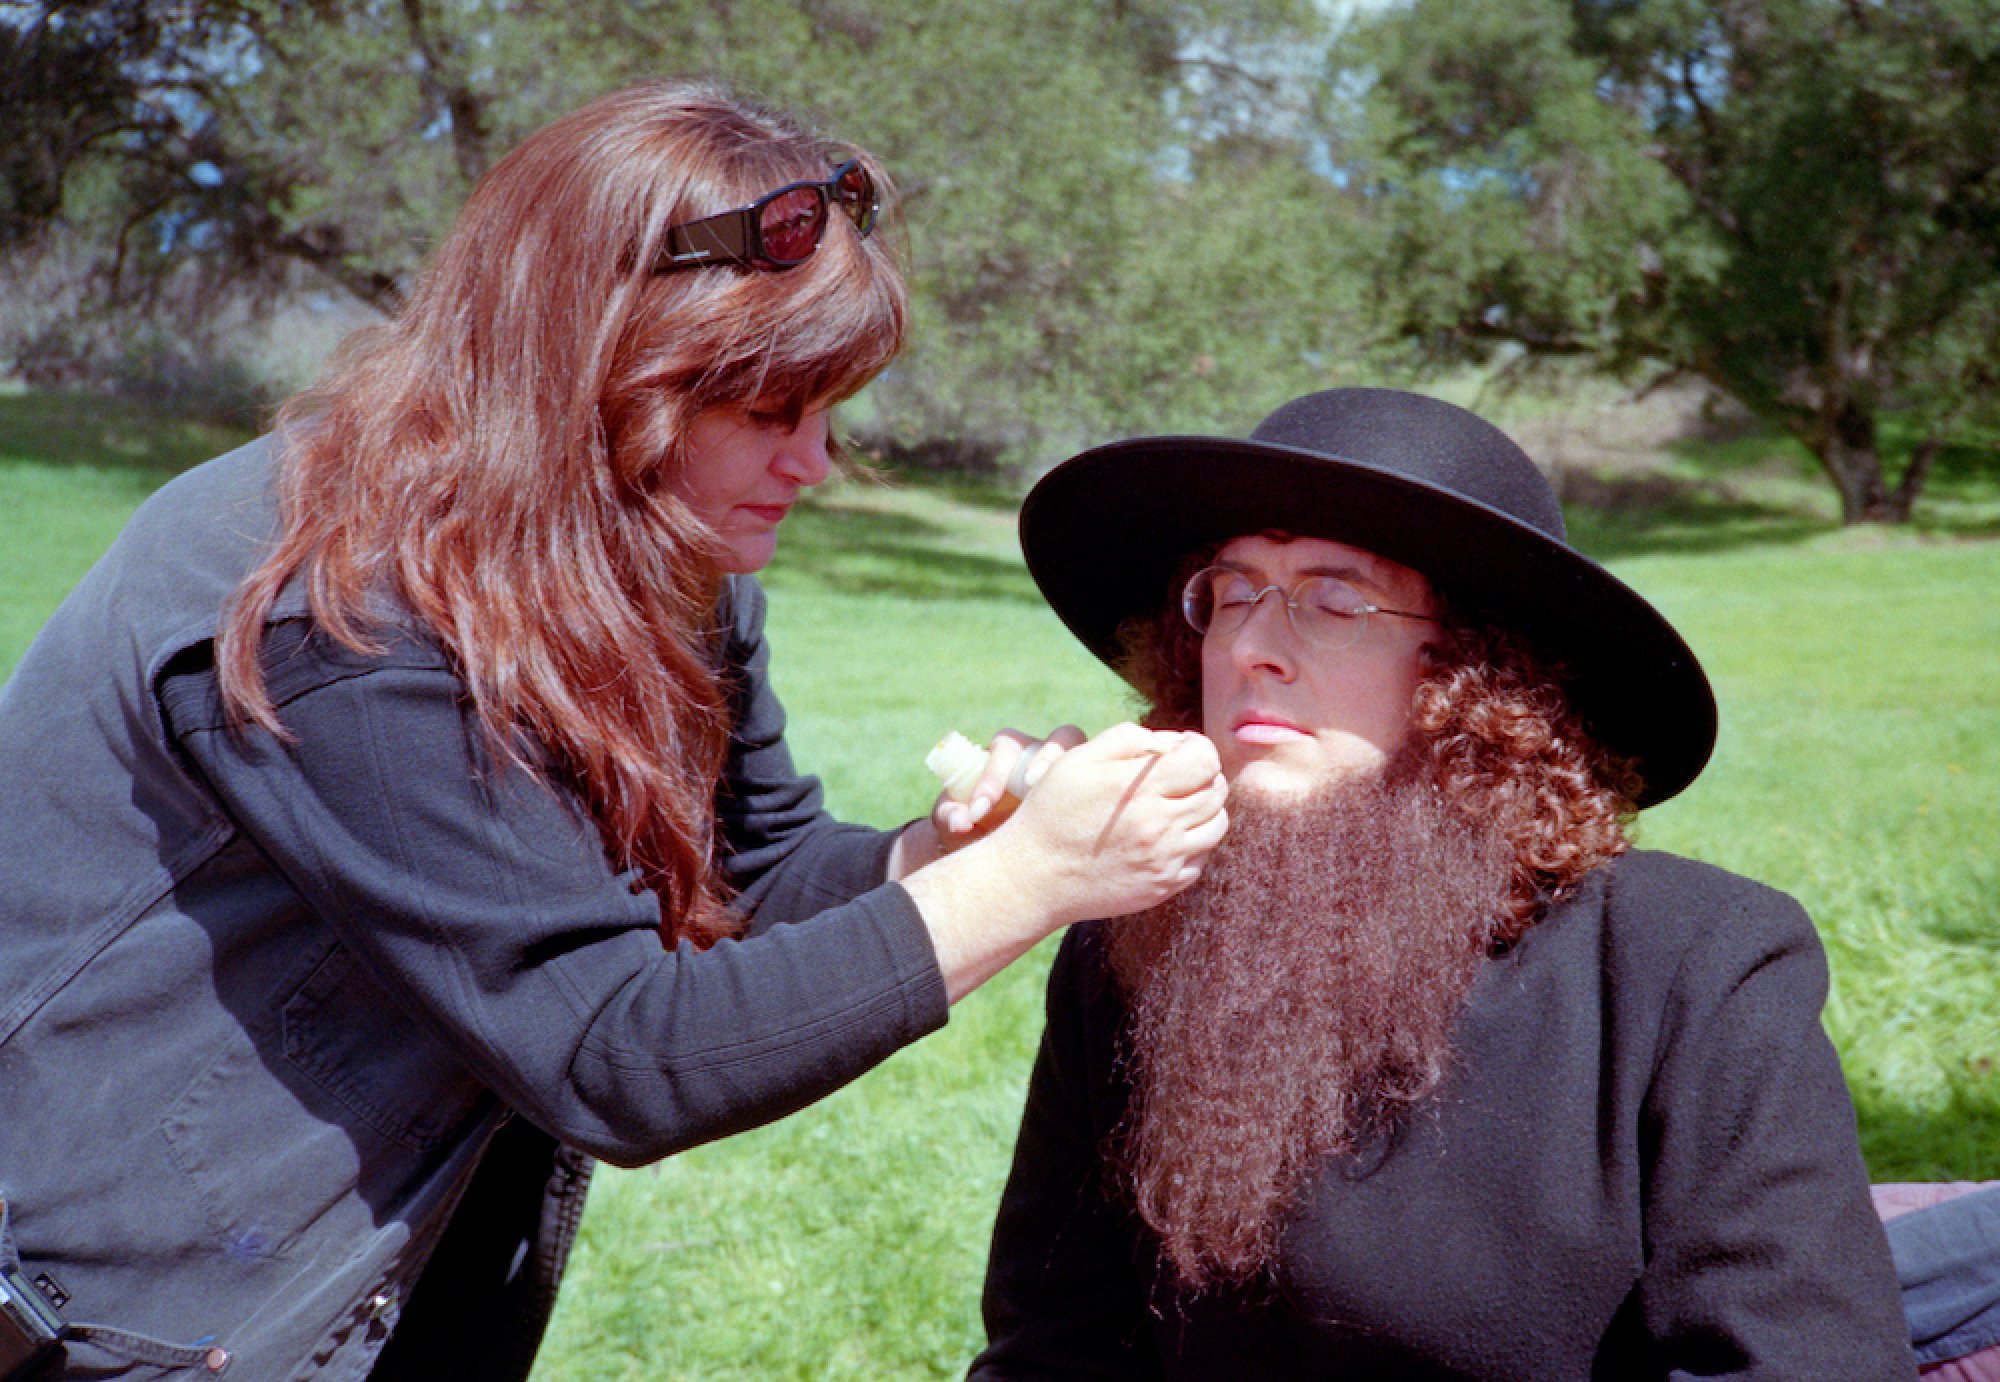 A makeup artist adjusts the beard on a man in all-black attire and a black Amish hat.